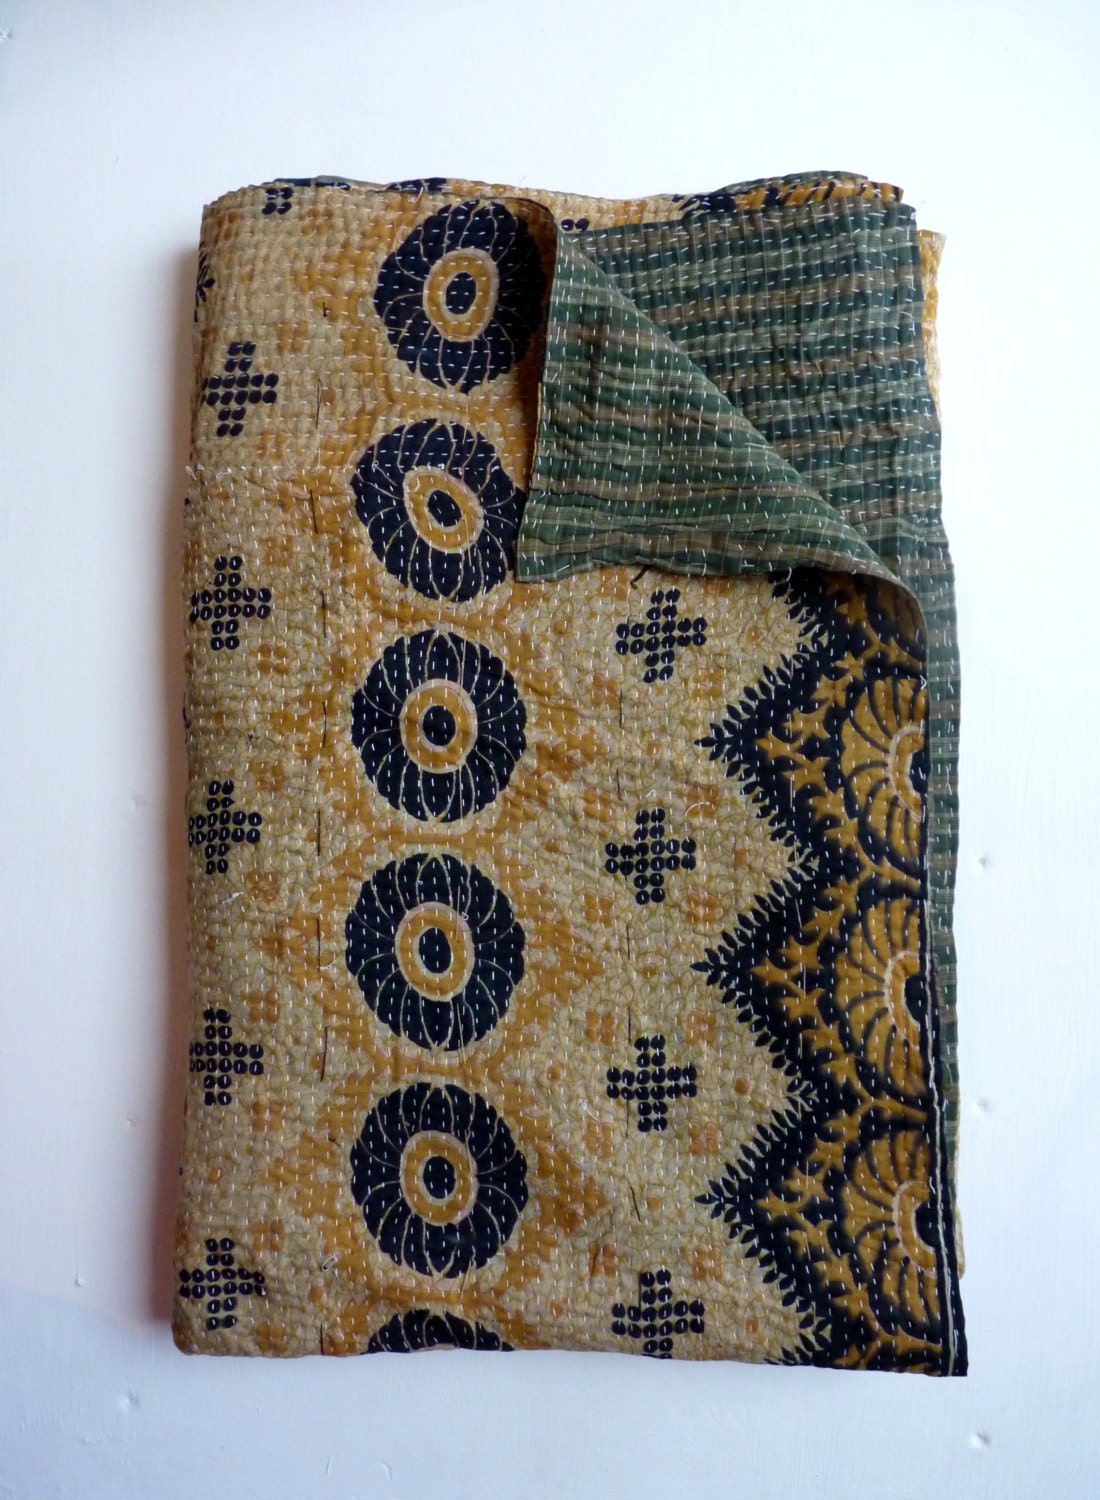 Kantha Blankets | Large Throws, Spreads | dignify